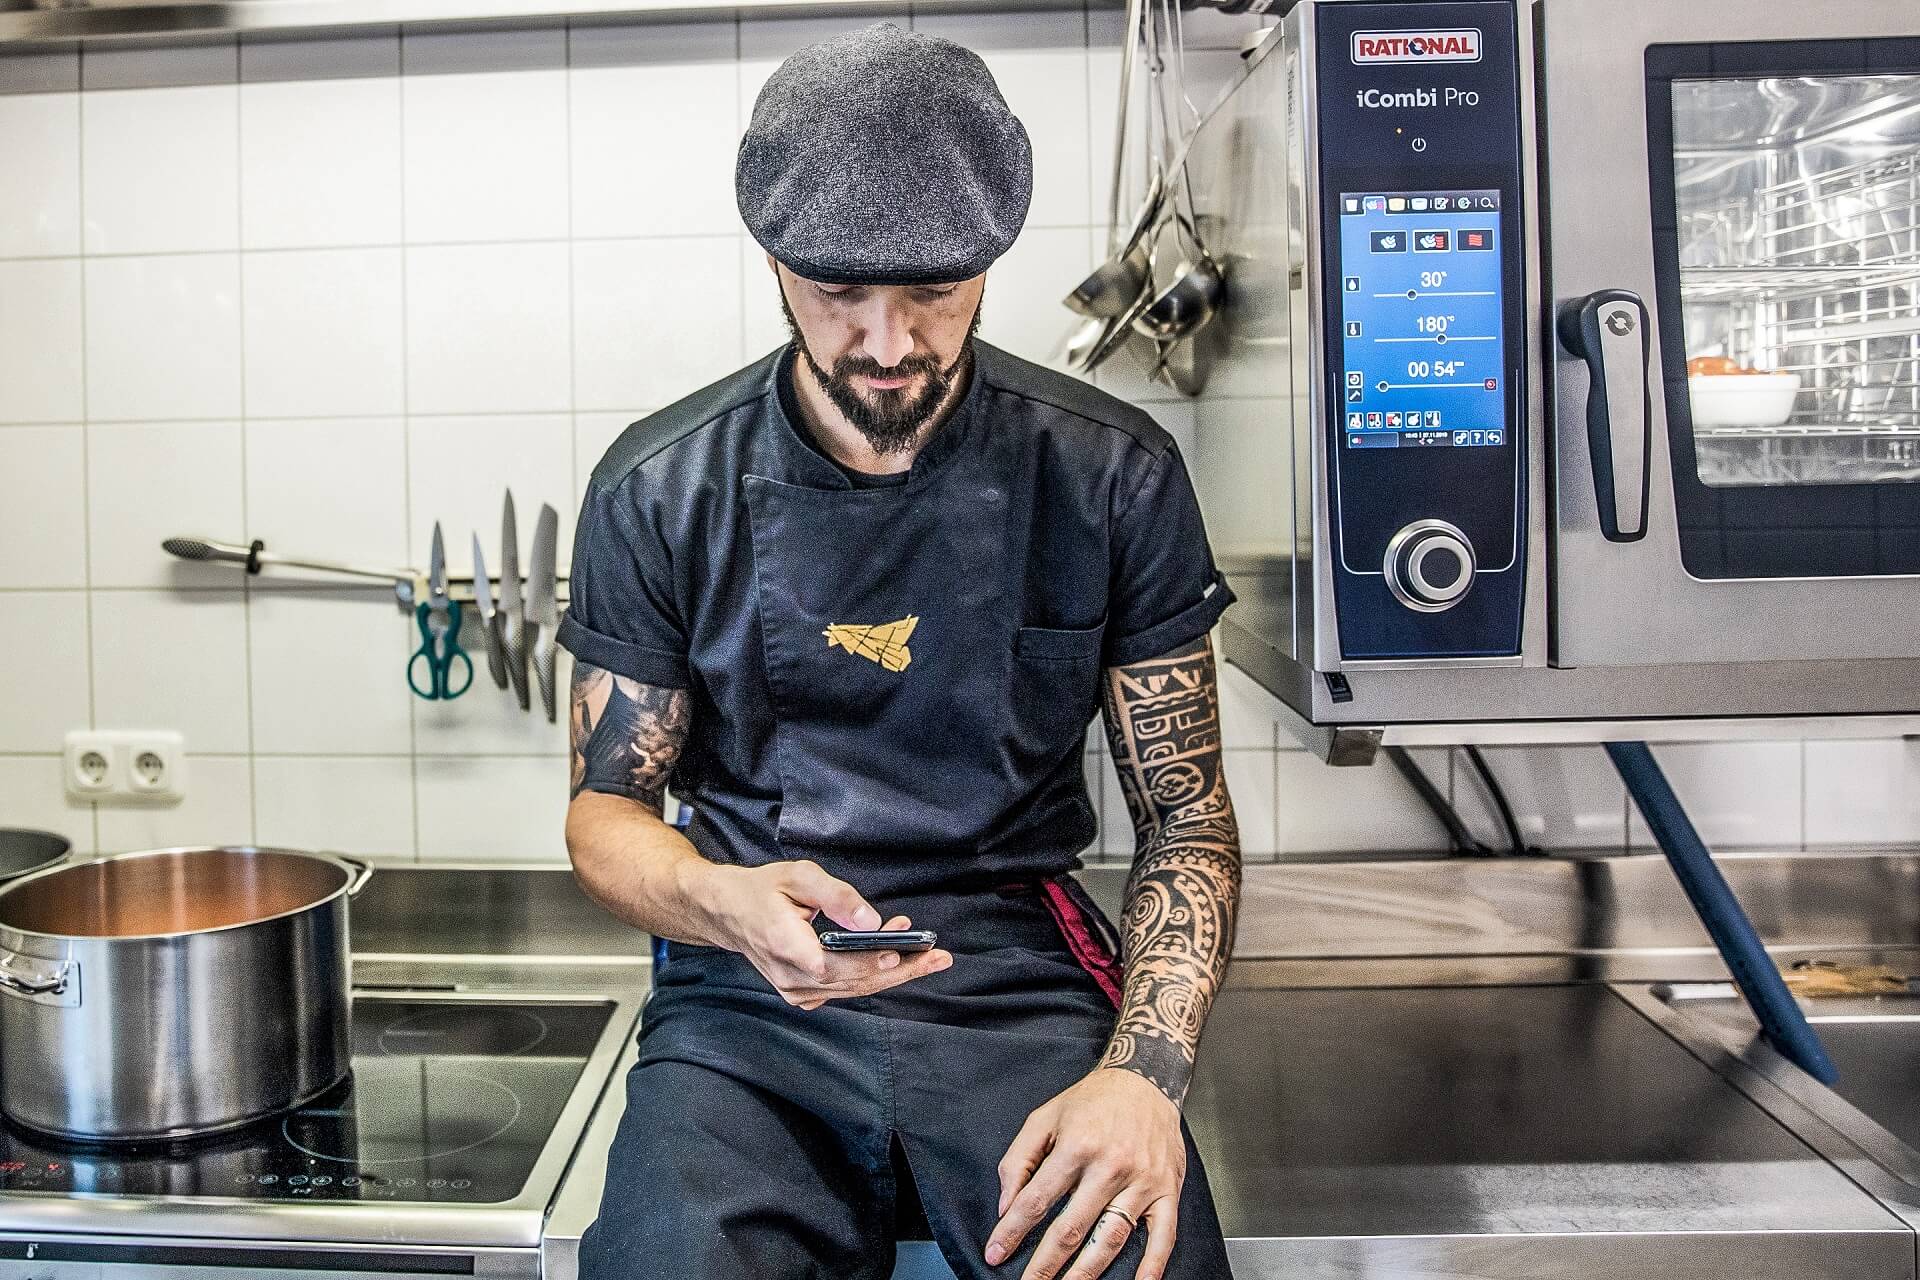 Chef monitoring the energy consumption of his kitchen equipment via Smartphone.